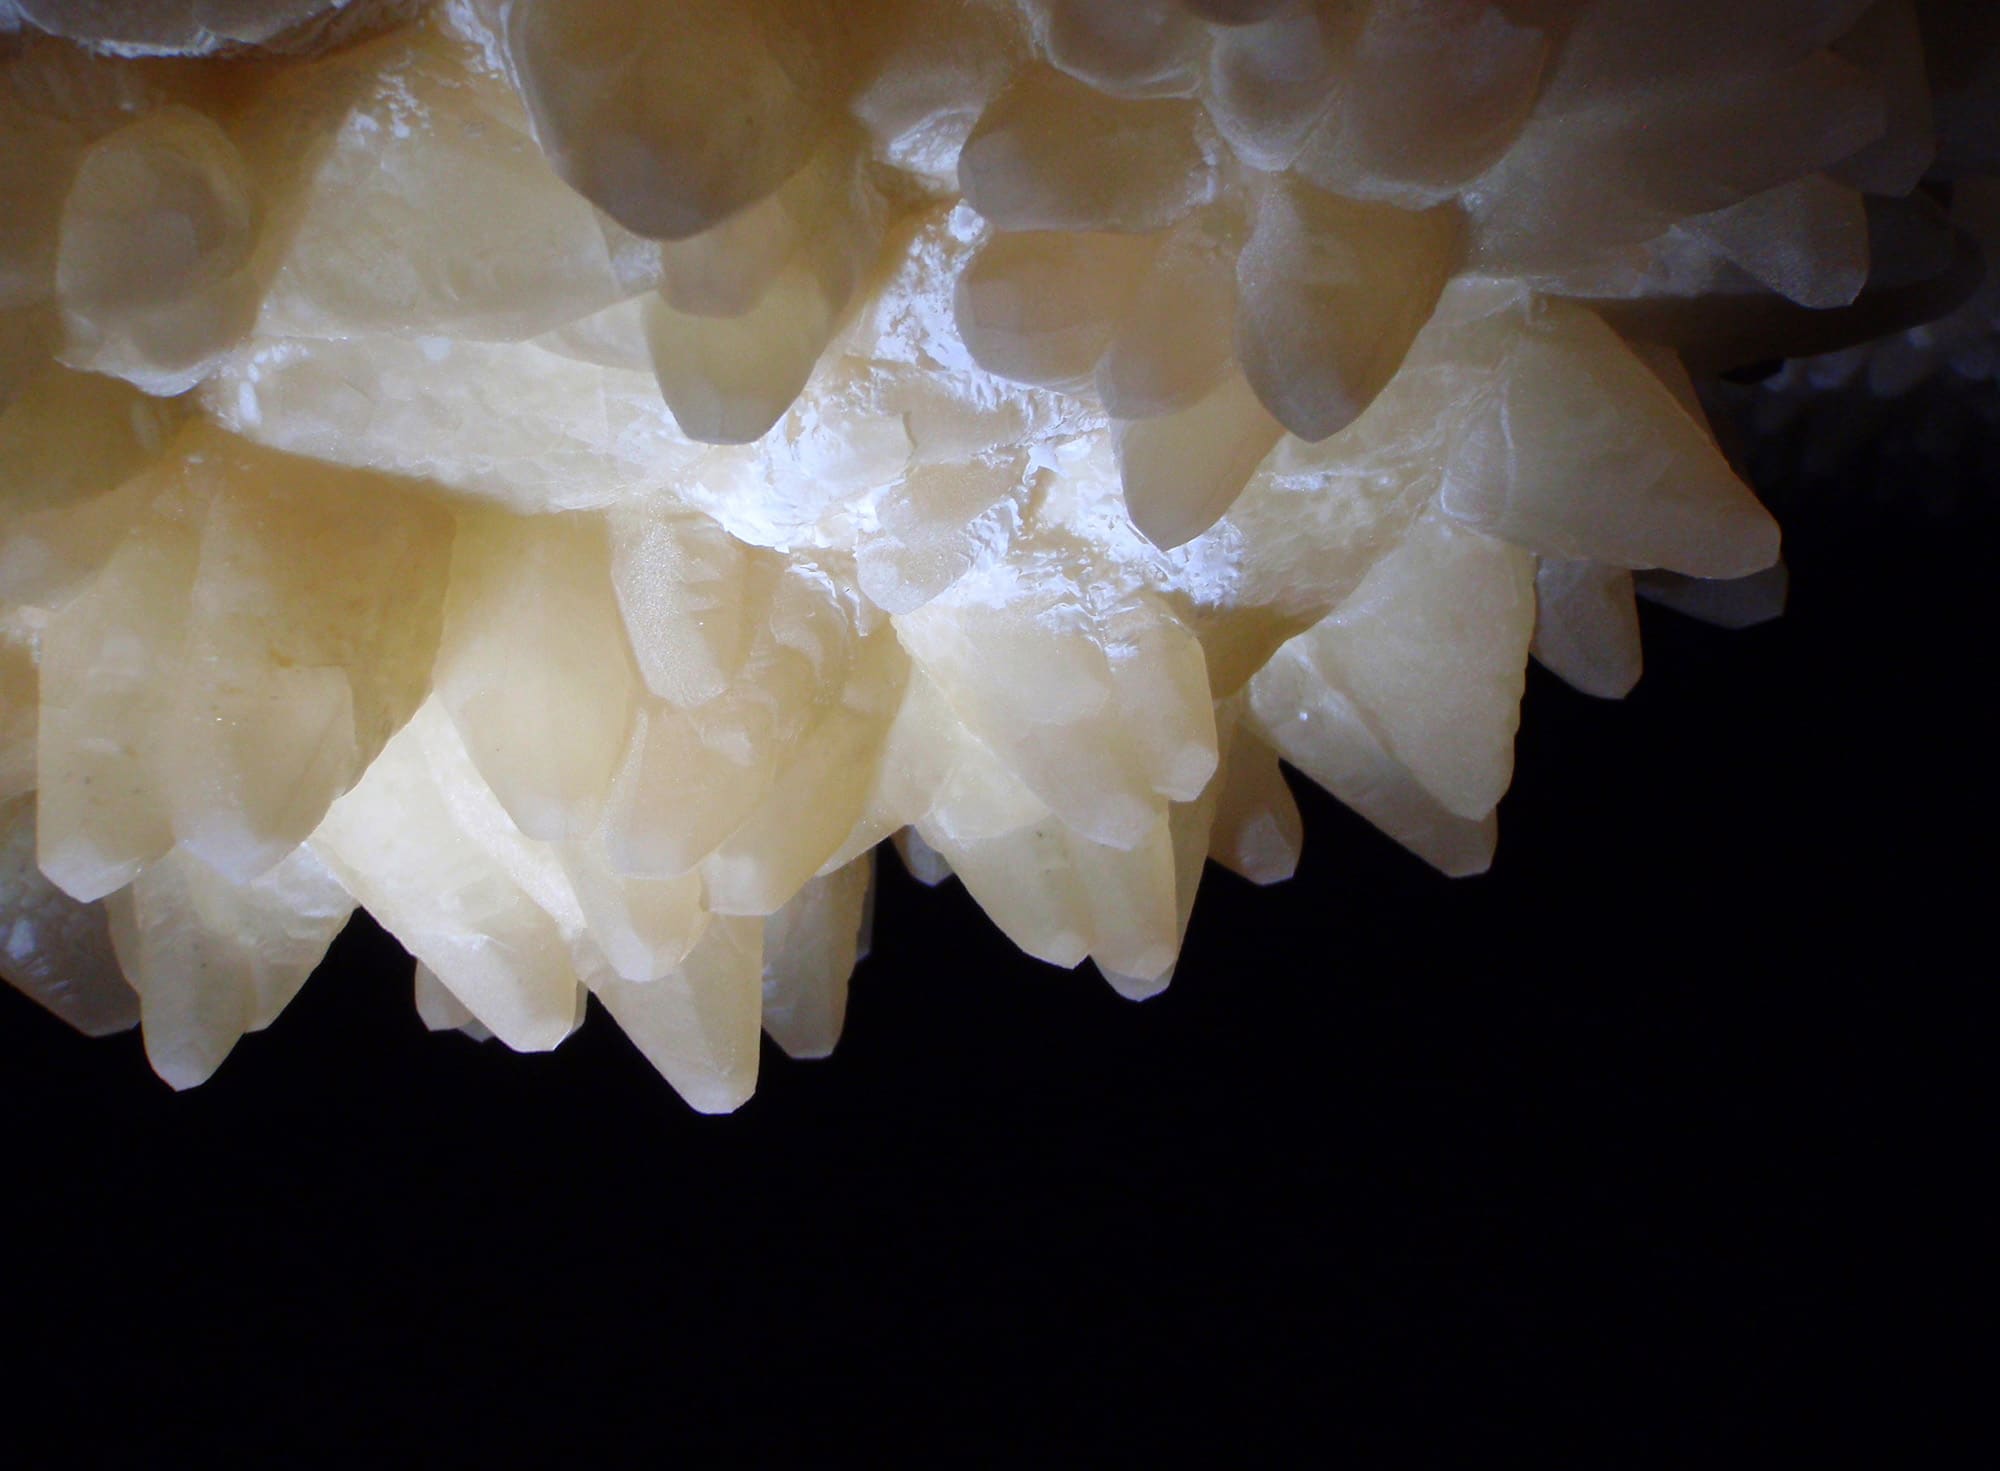 A cluster of jewel-like minerals on the ceiling of a cave.